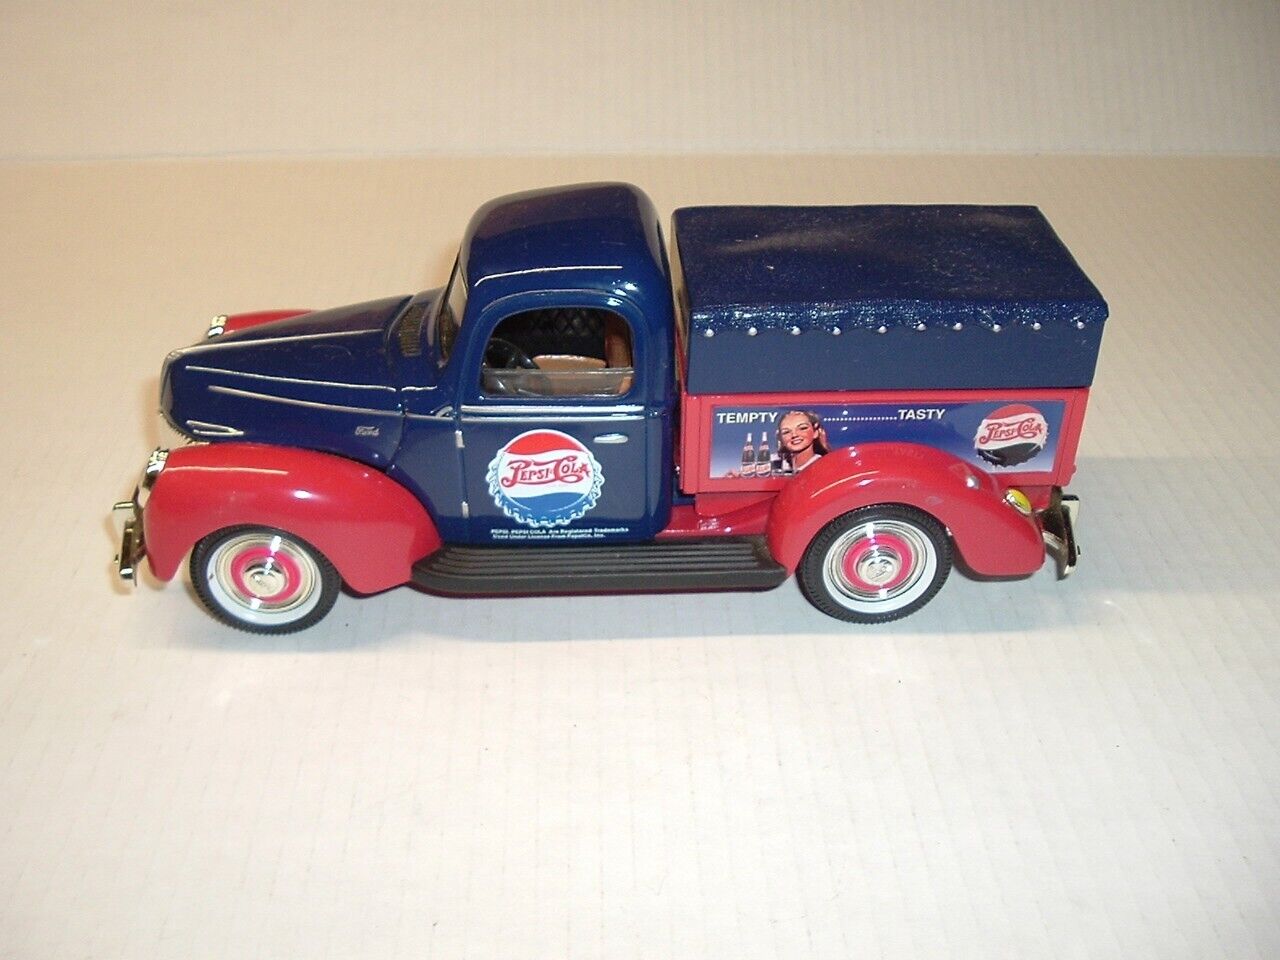 1940 Ford Truck Pepsi Cola Advertising Tempty Tasty